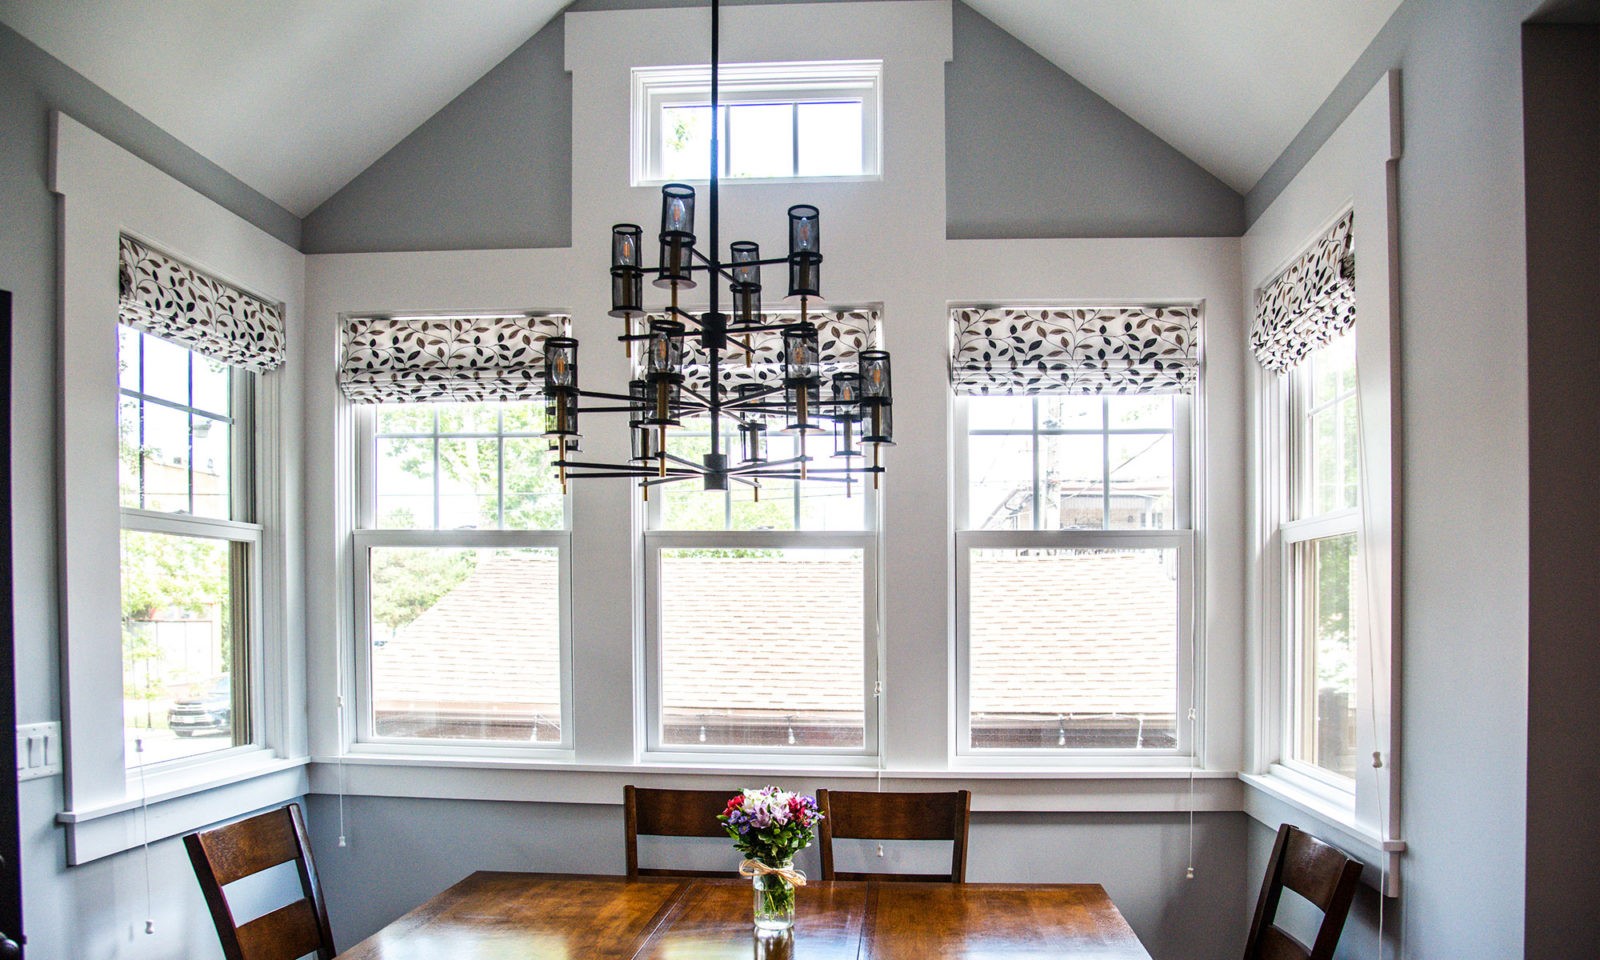 6 bright windows on the walls of a newly renovated kitchen with a chandelier and a dark wooden table